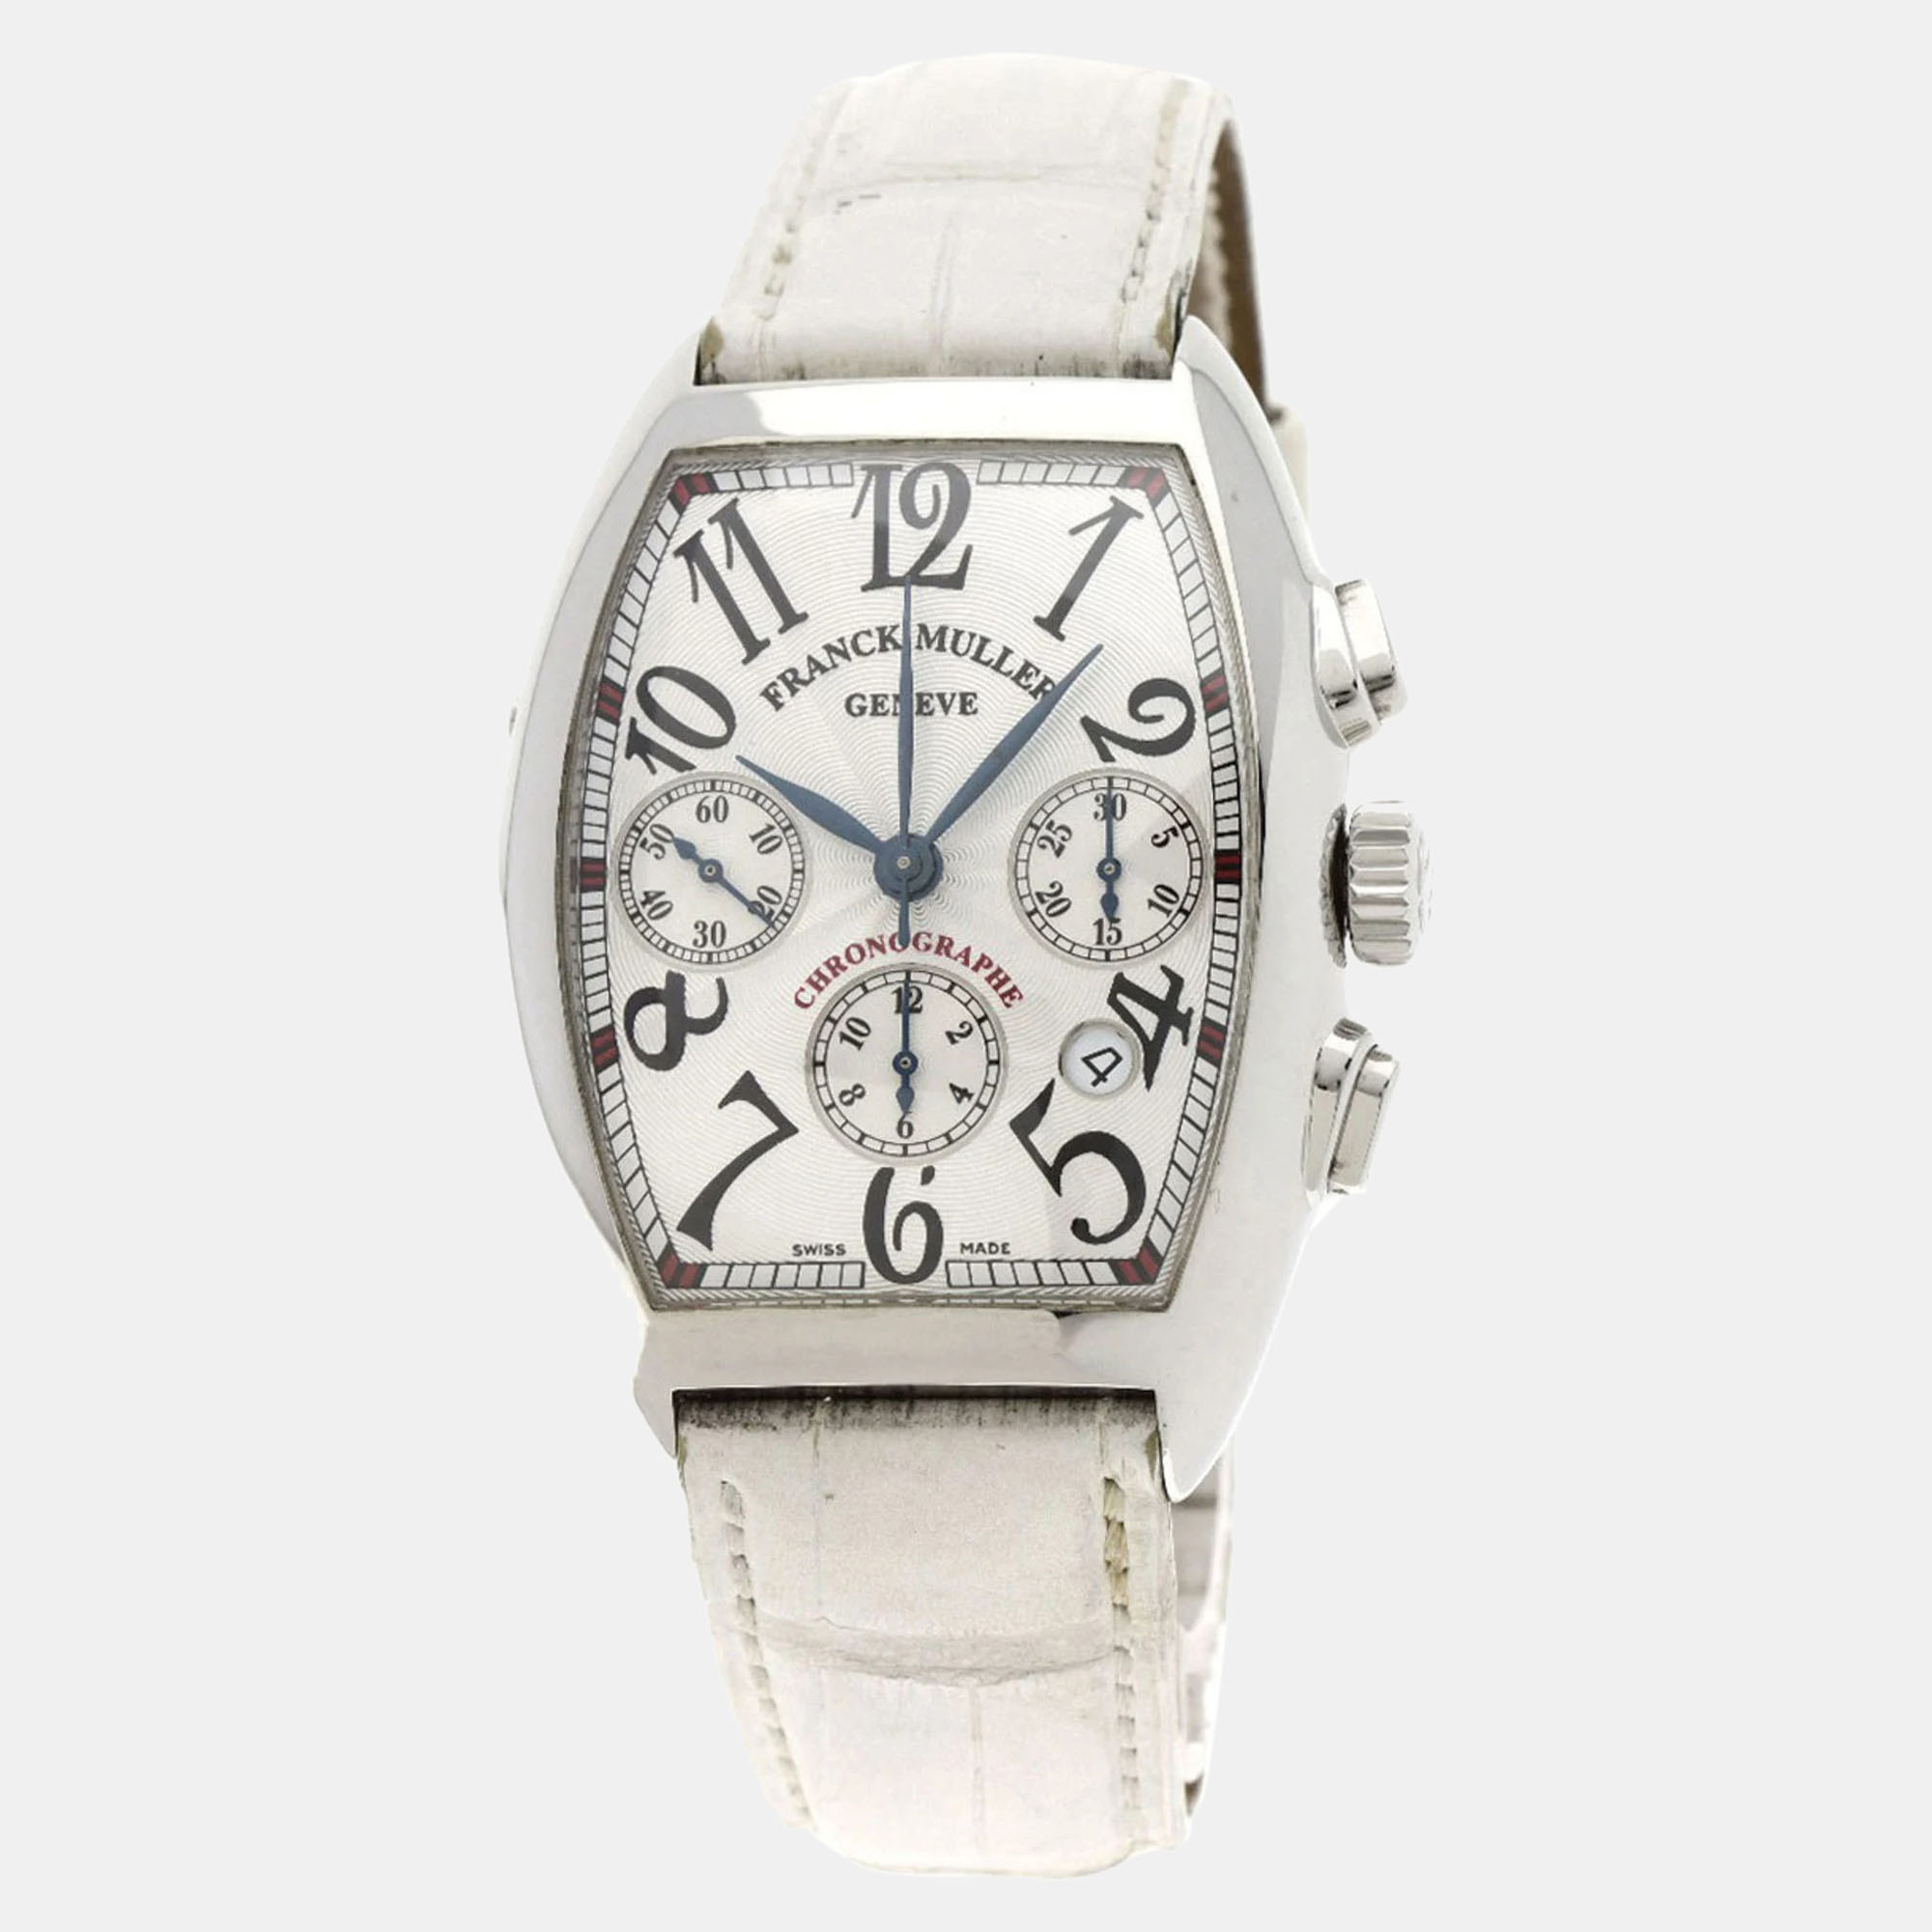 A timeless silhouette made of high quality materials and packed with precision and luxury makes this Franck Muller wristwatch the perfect choice for a sophisticated finish to any look. It is a grand creation to elevate the everyday experience.